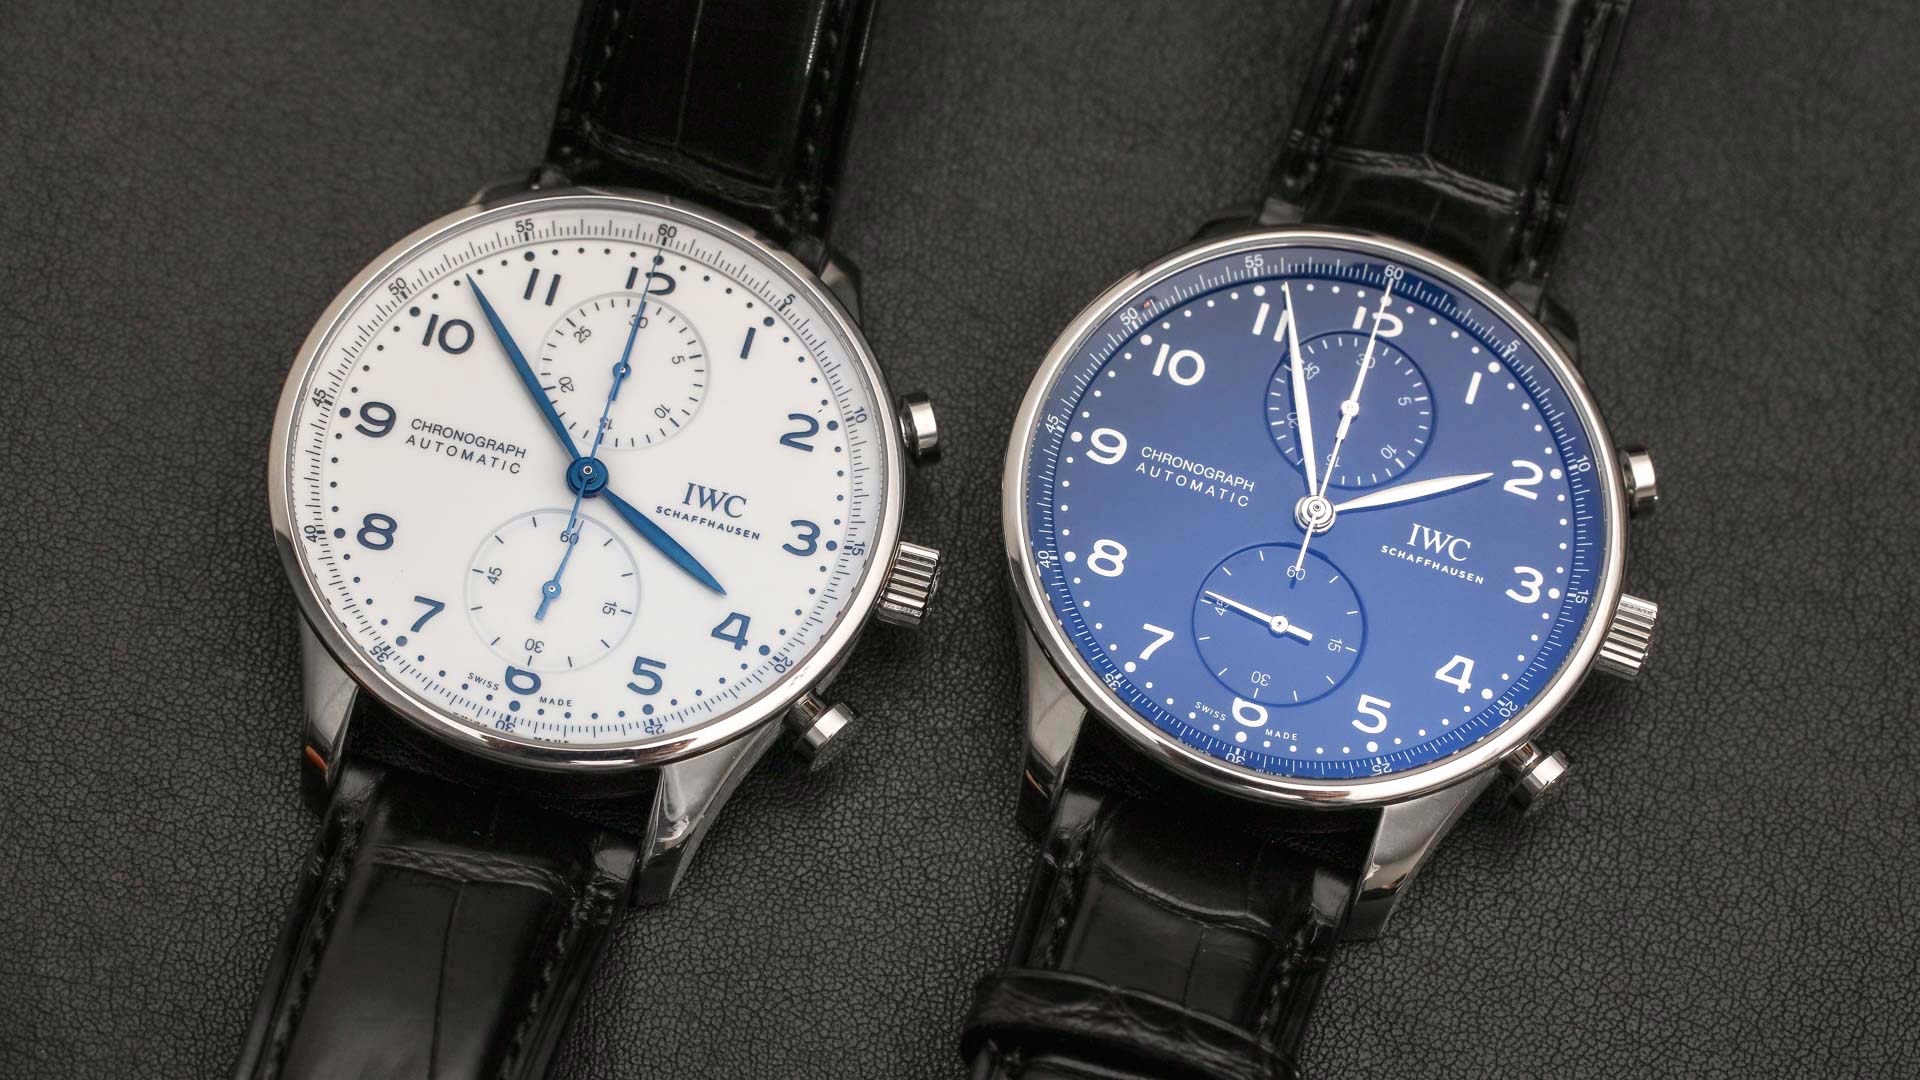 IWC Portugieser Chronograph Edition ‘150 Years’ Watch Hands-On